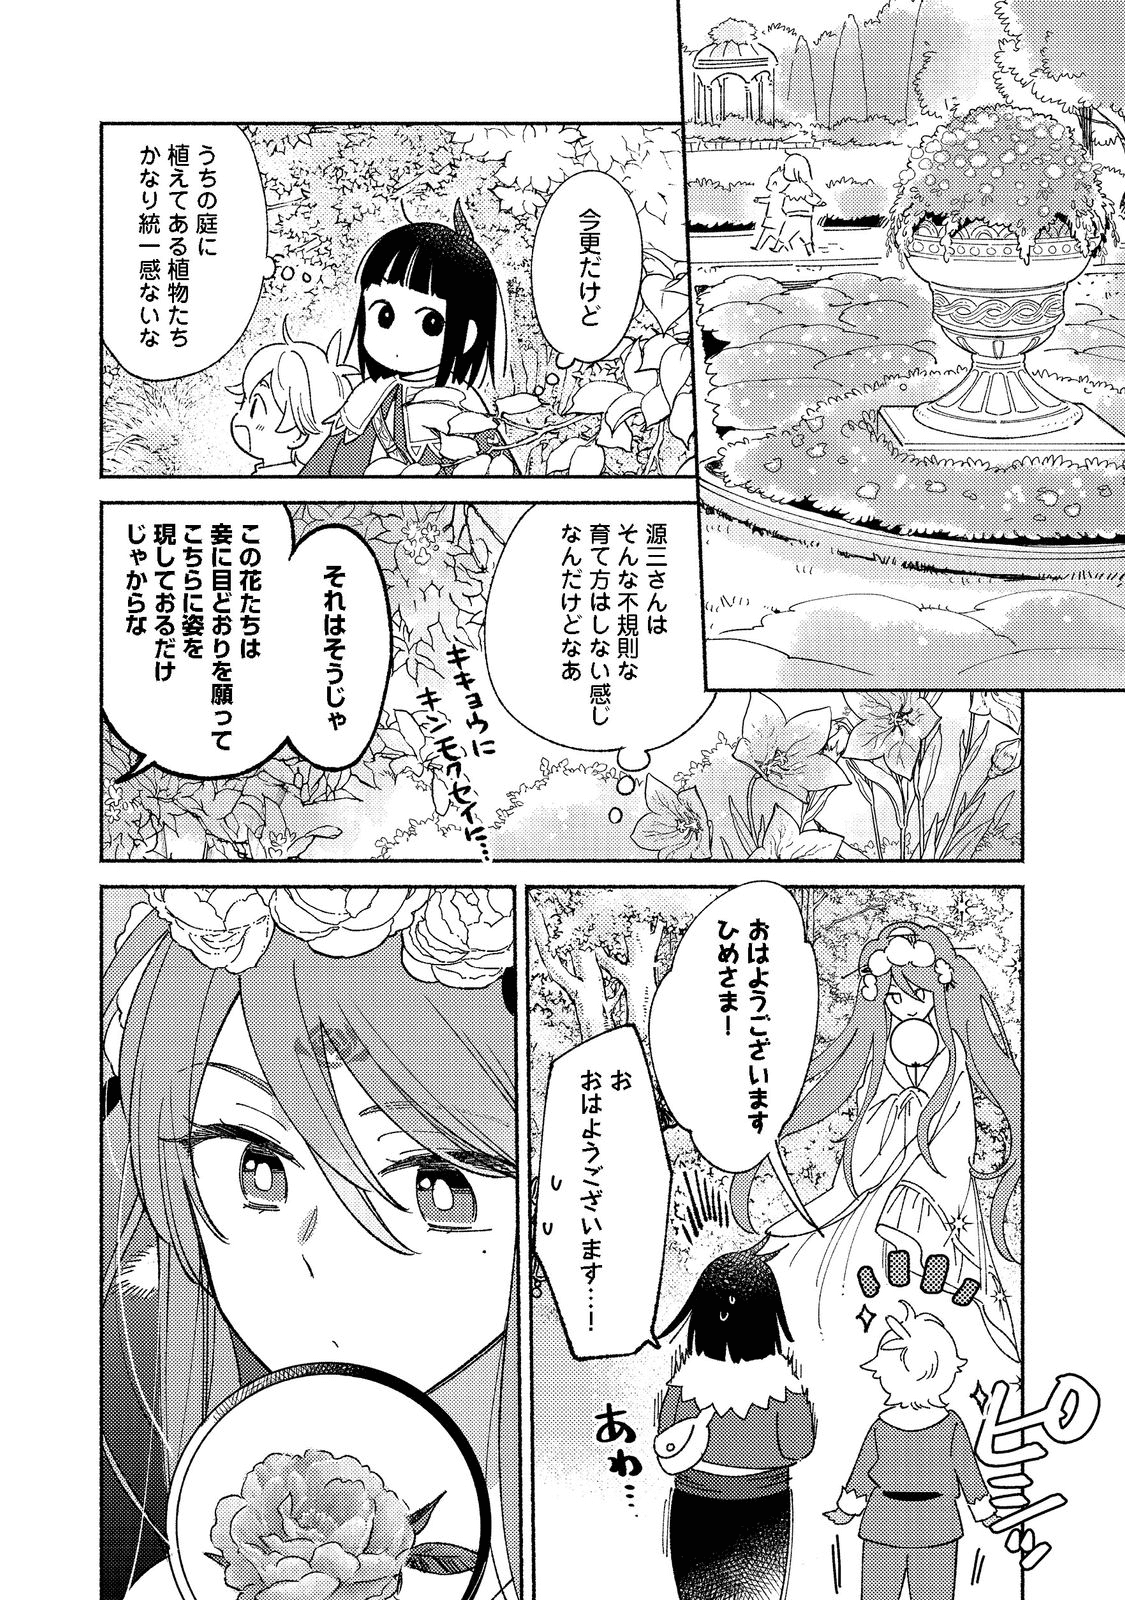 I’m the White Pig Nobleman 第14.2話 - Page 8